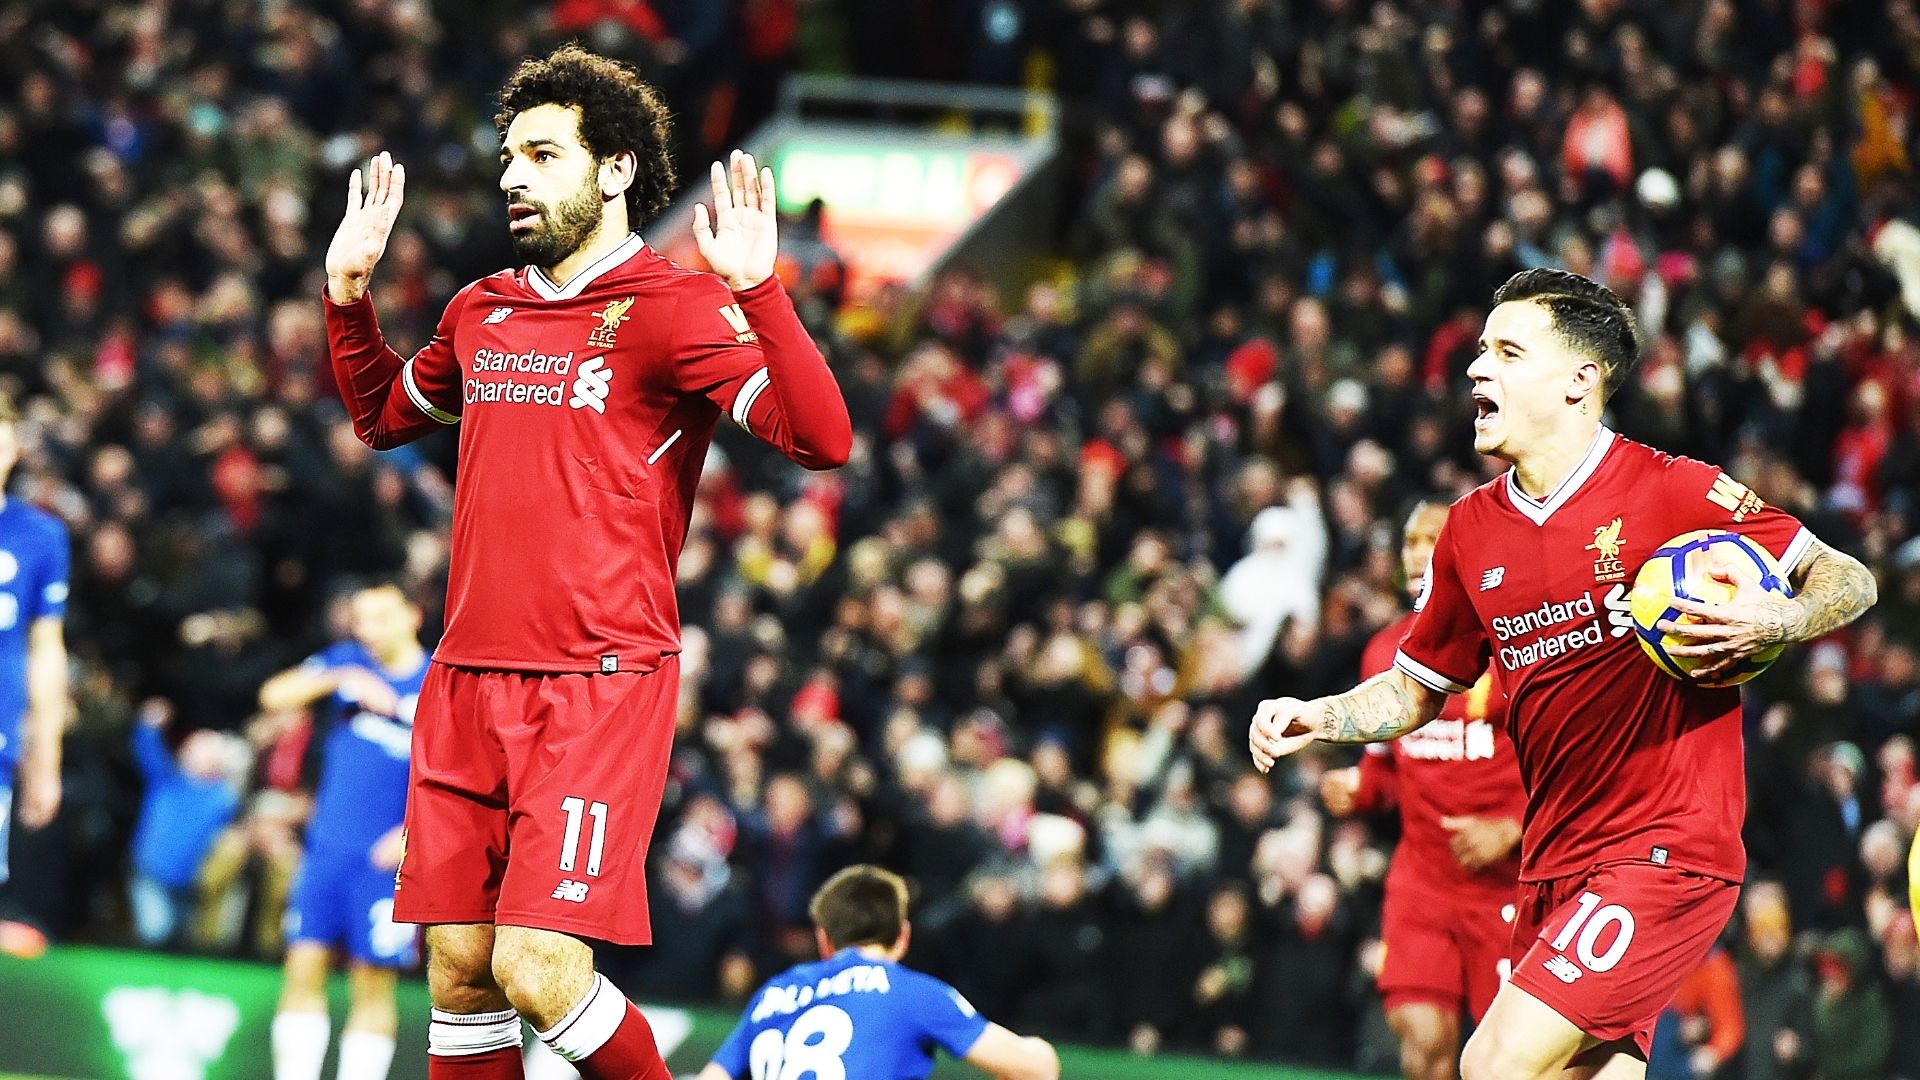 Chelsea-Liverpool draw favours Man City's title chances - Gary Cahill